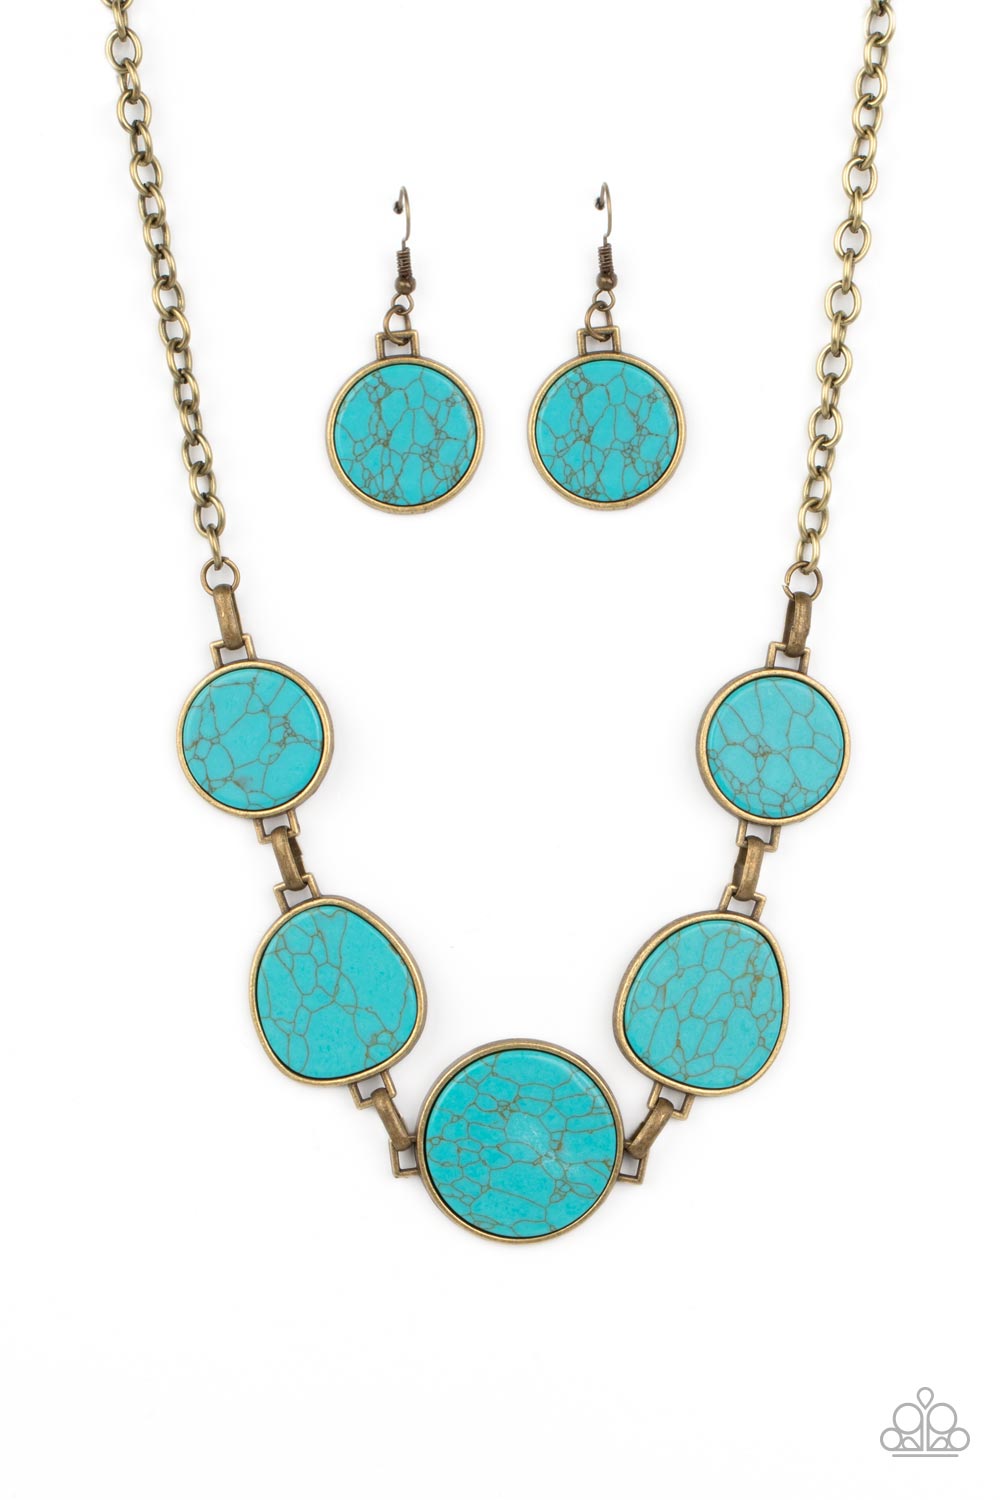 Santa Fe Flats - Brass (Turquoise) Necklace